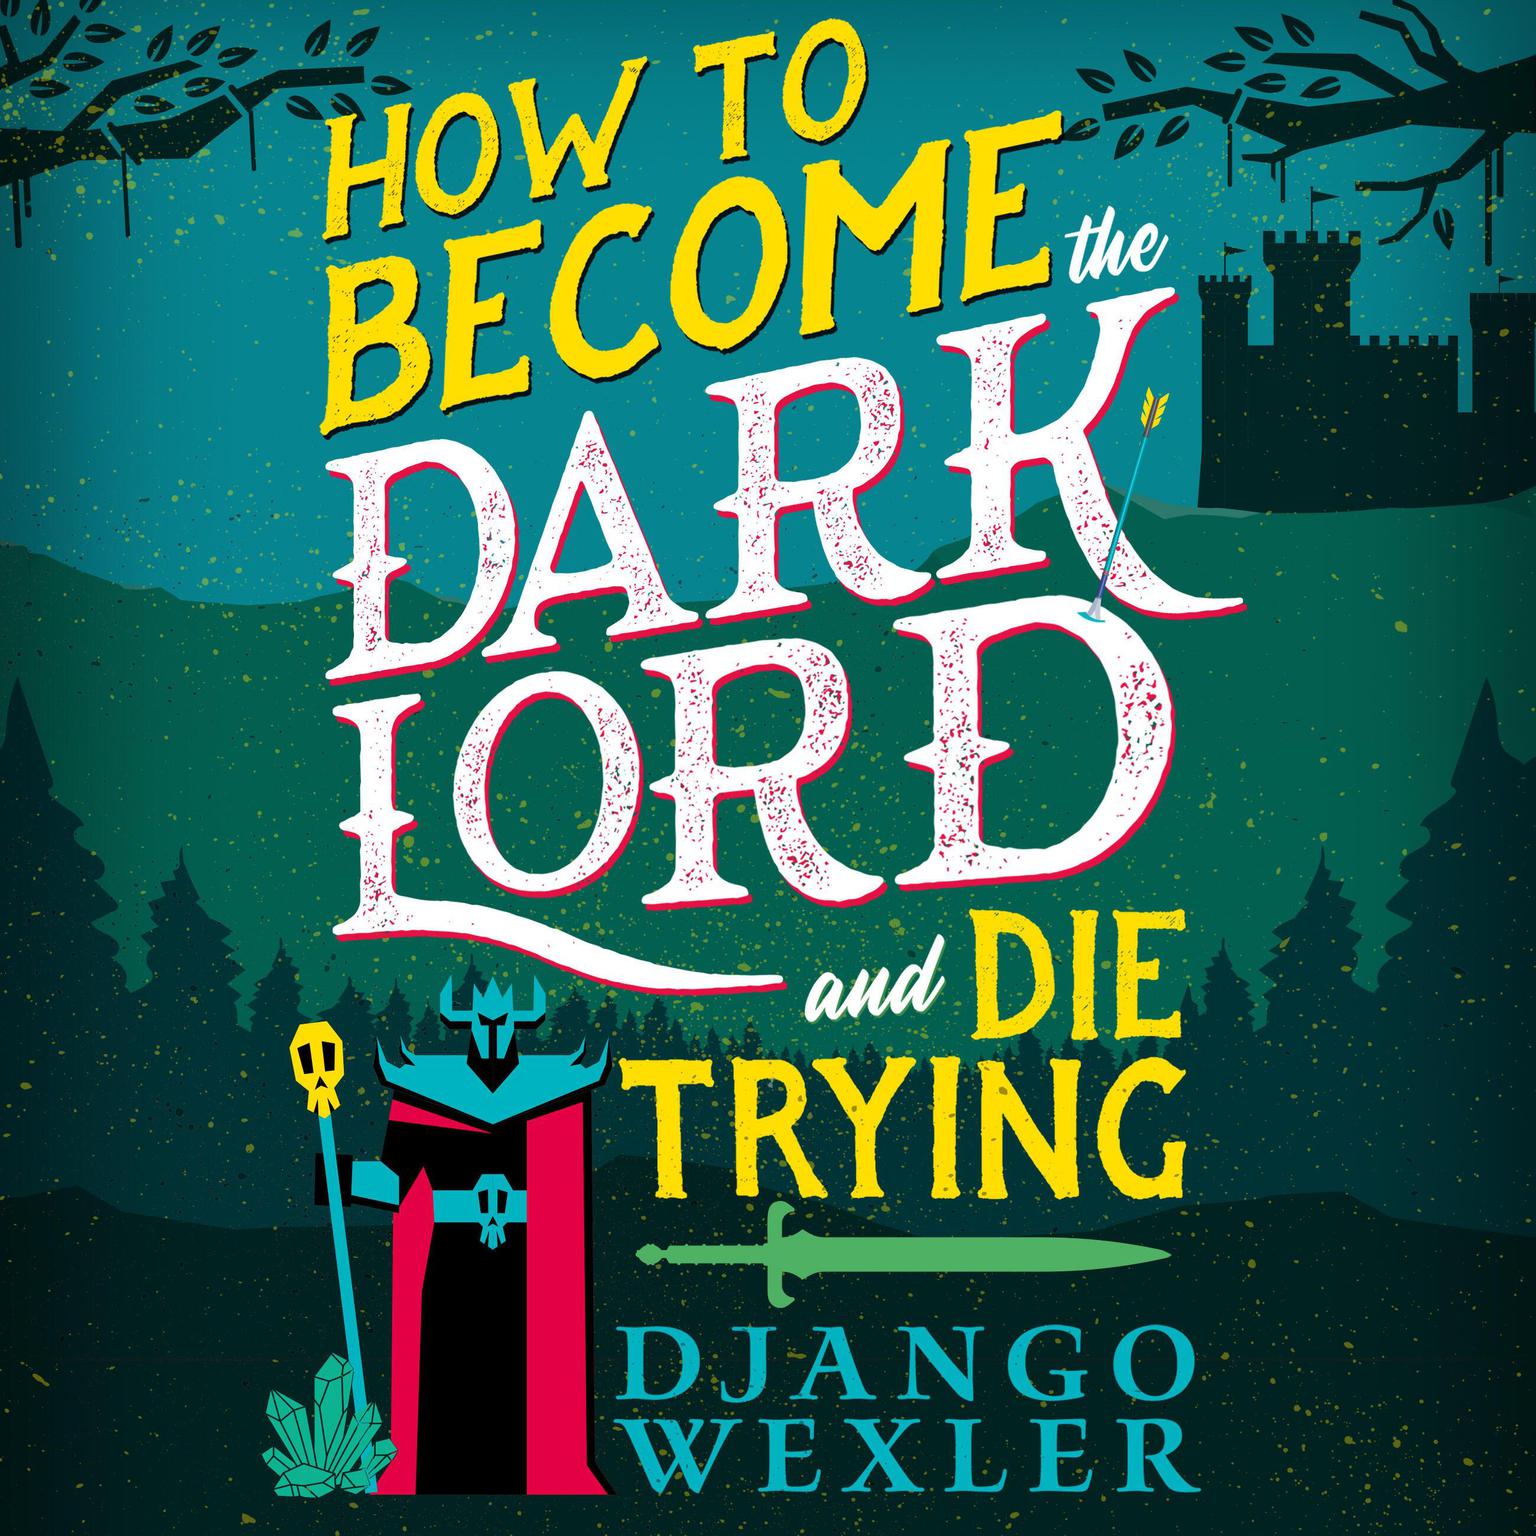 How to Become the Dark Lord and Die Trying Audiobook, by Django Wexler